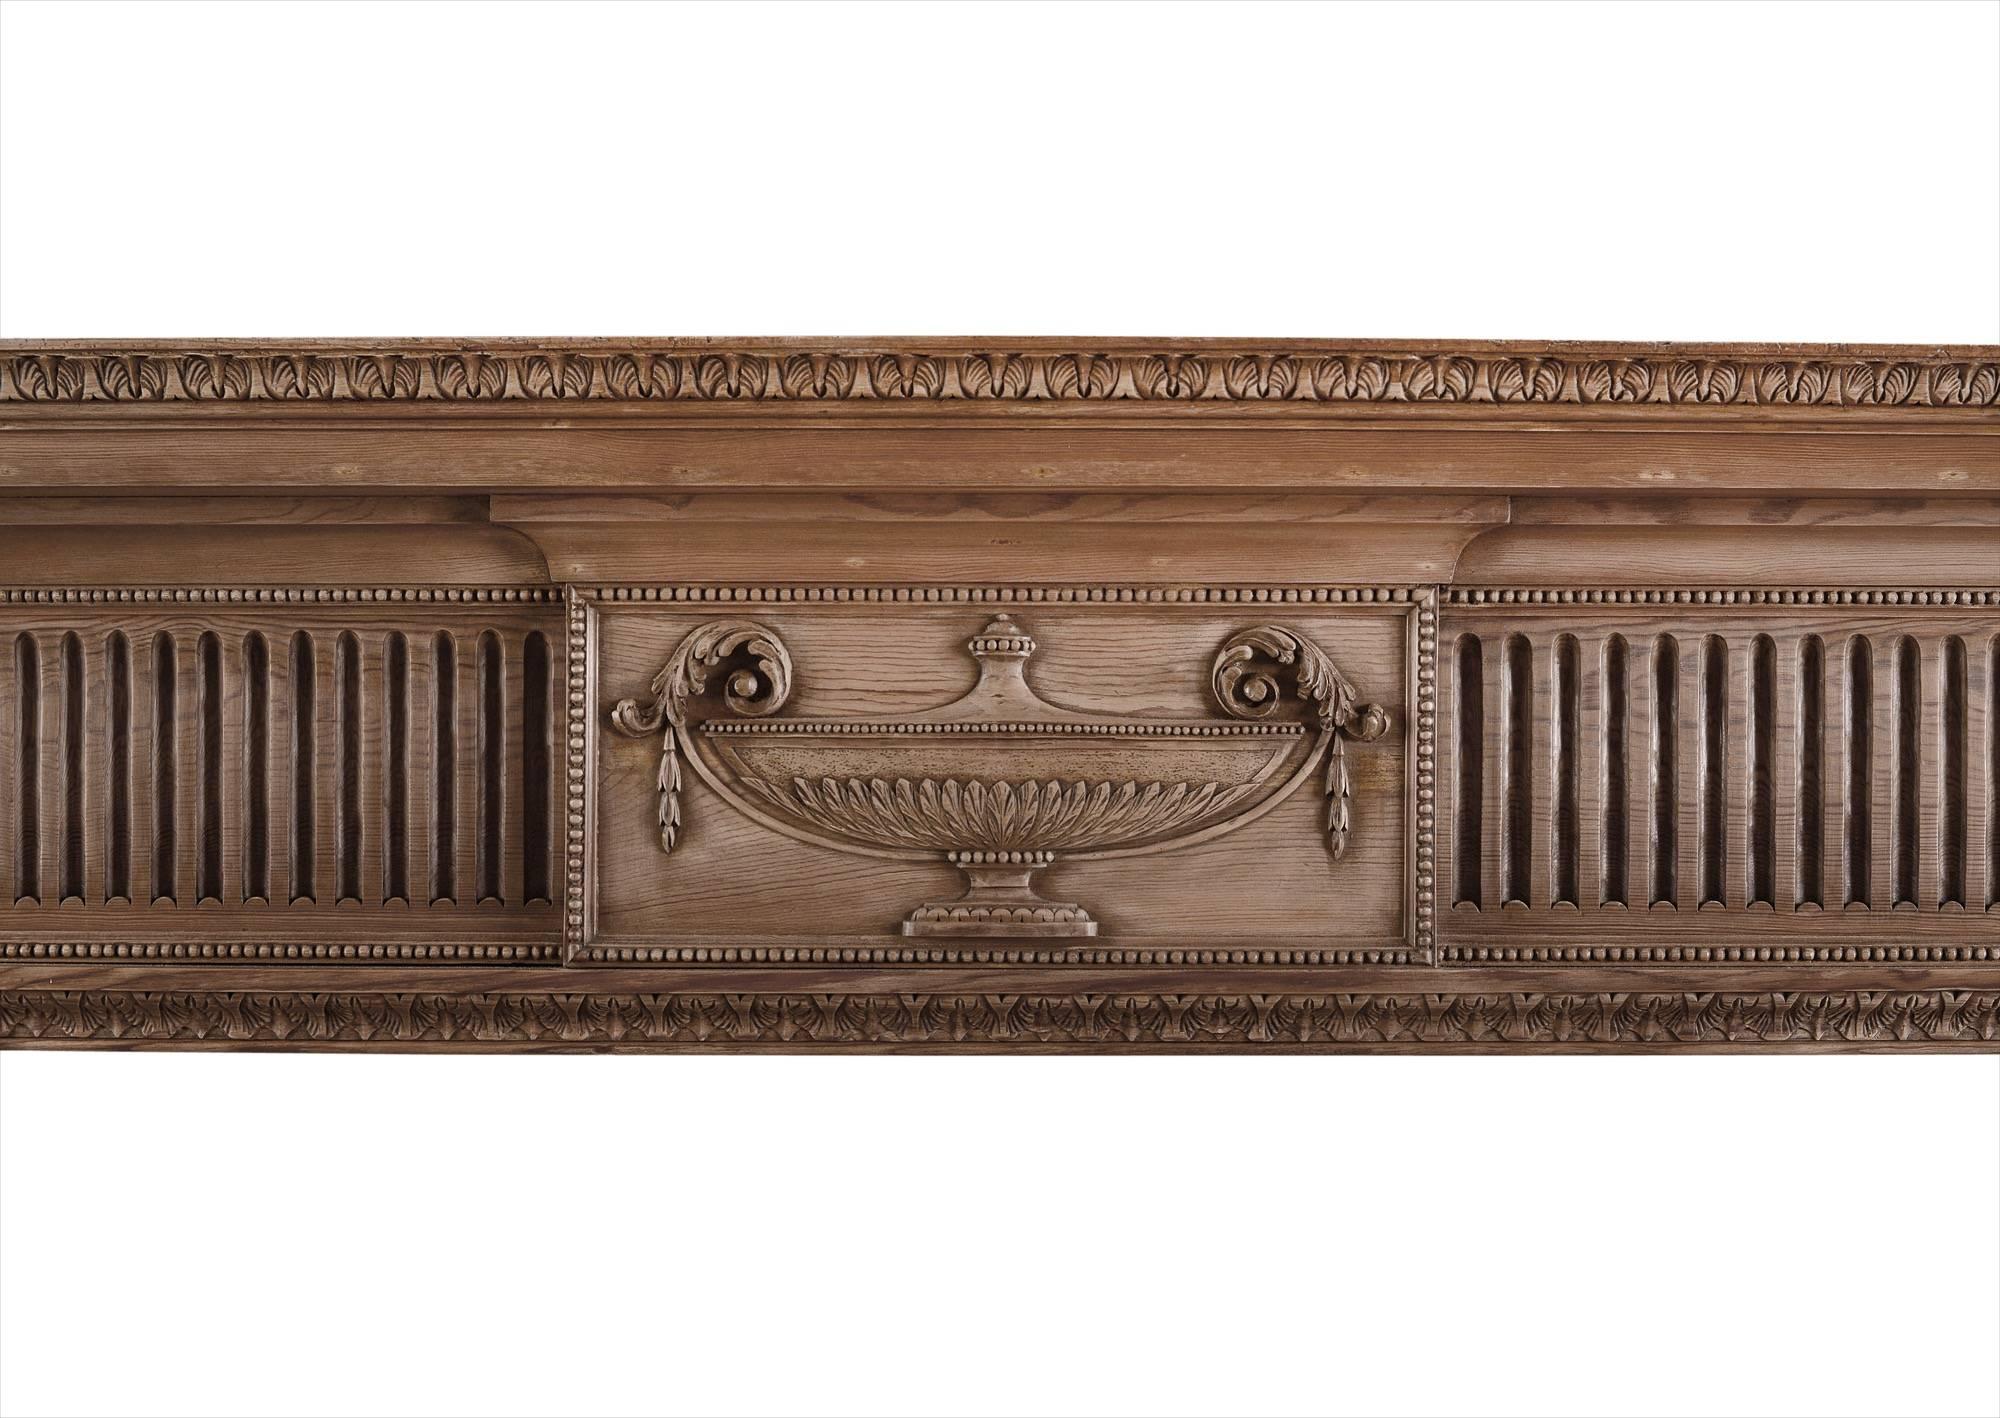 An English wood fireplace in the Georgian manner. The fluted frieze with carved urn to centre tablet adorned with carved beading, the tapering, panelled jambs with bellflowers and tied ribbons, surmounted Athenian leaf to end block. Moulded shelf